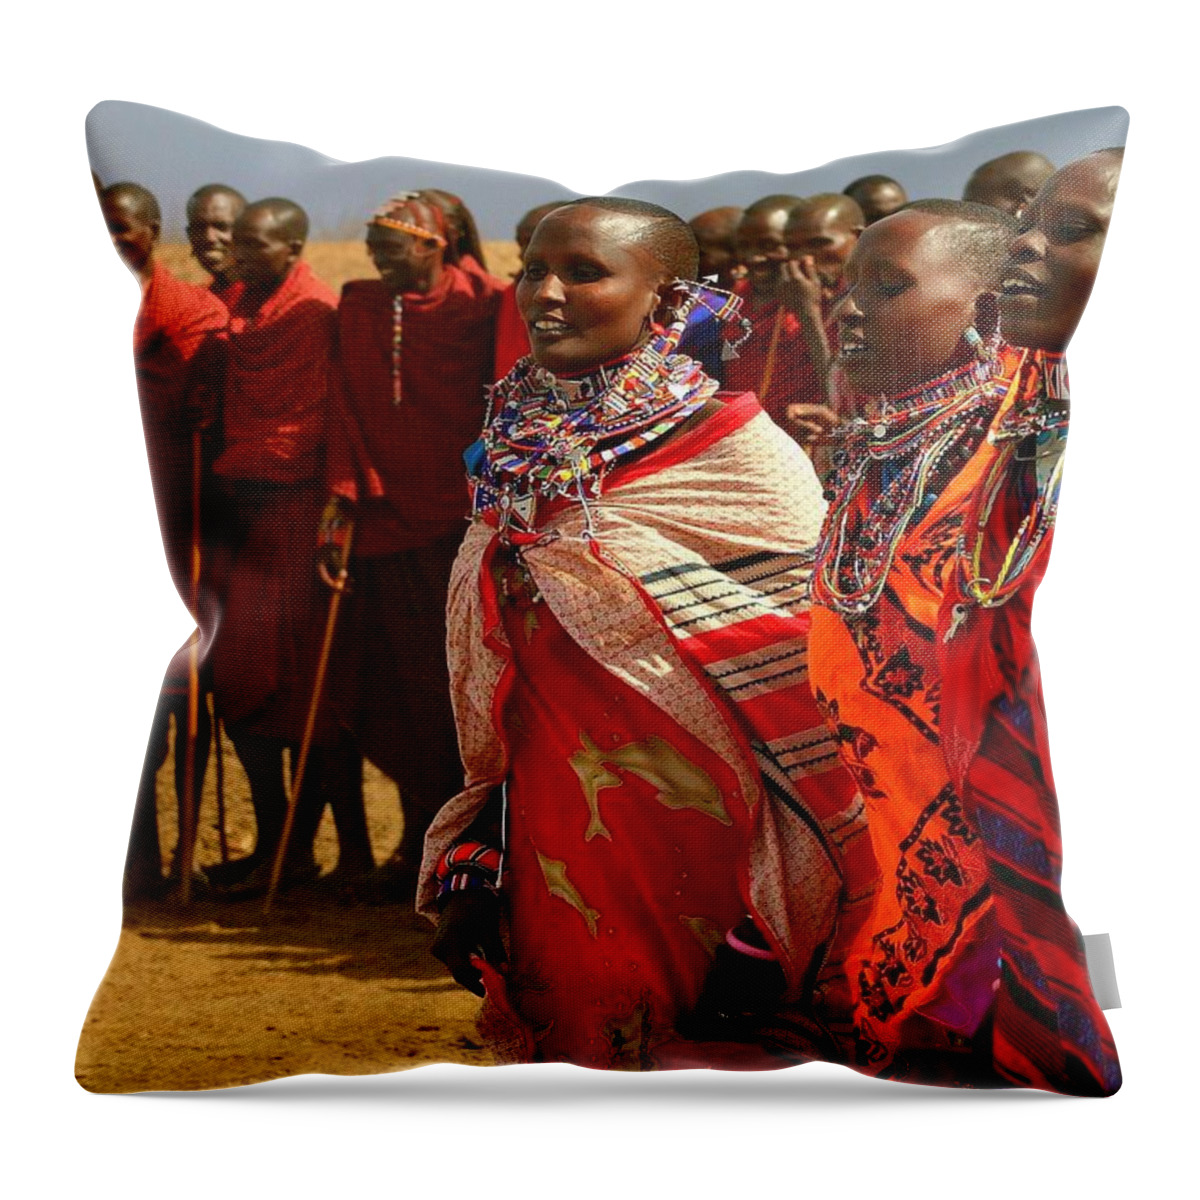 Brilliant Red Throw Pillow featuring the photograph Masai Women by Gene Taylor